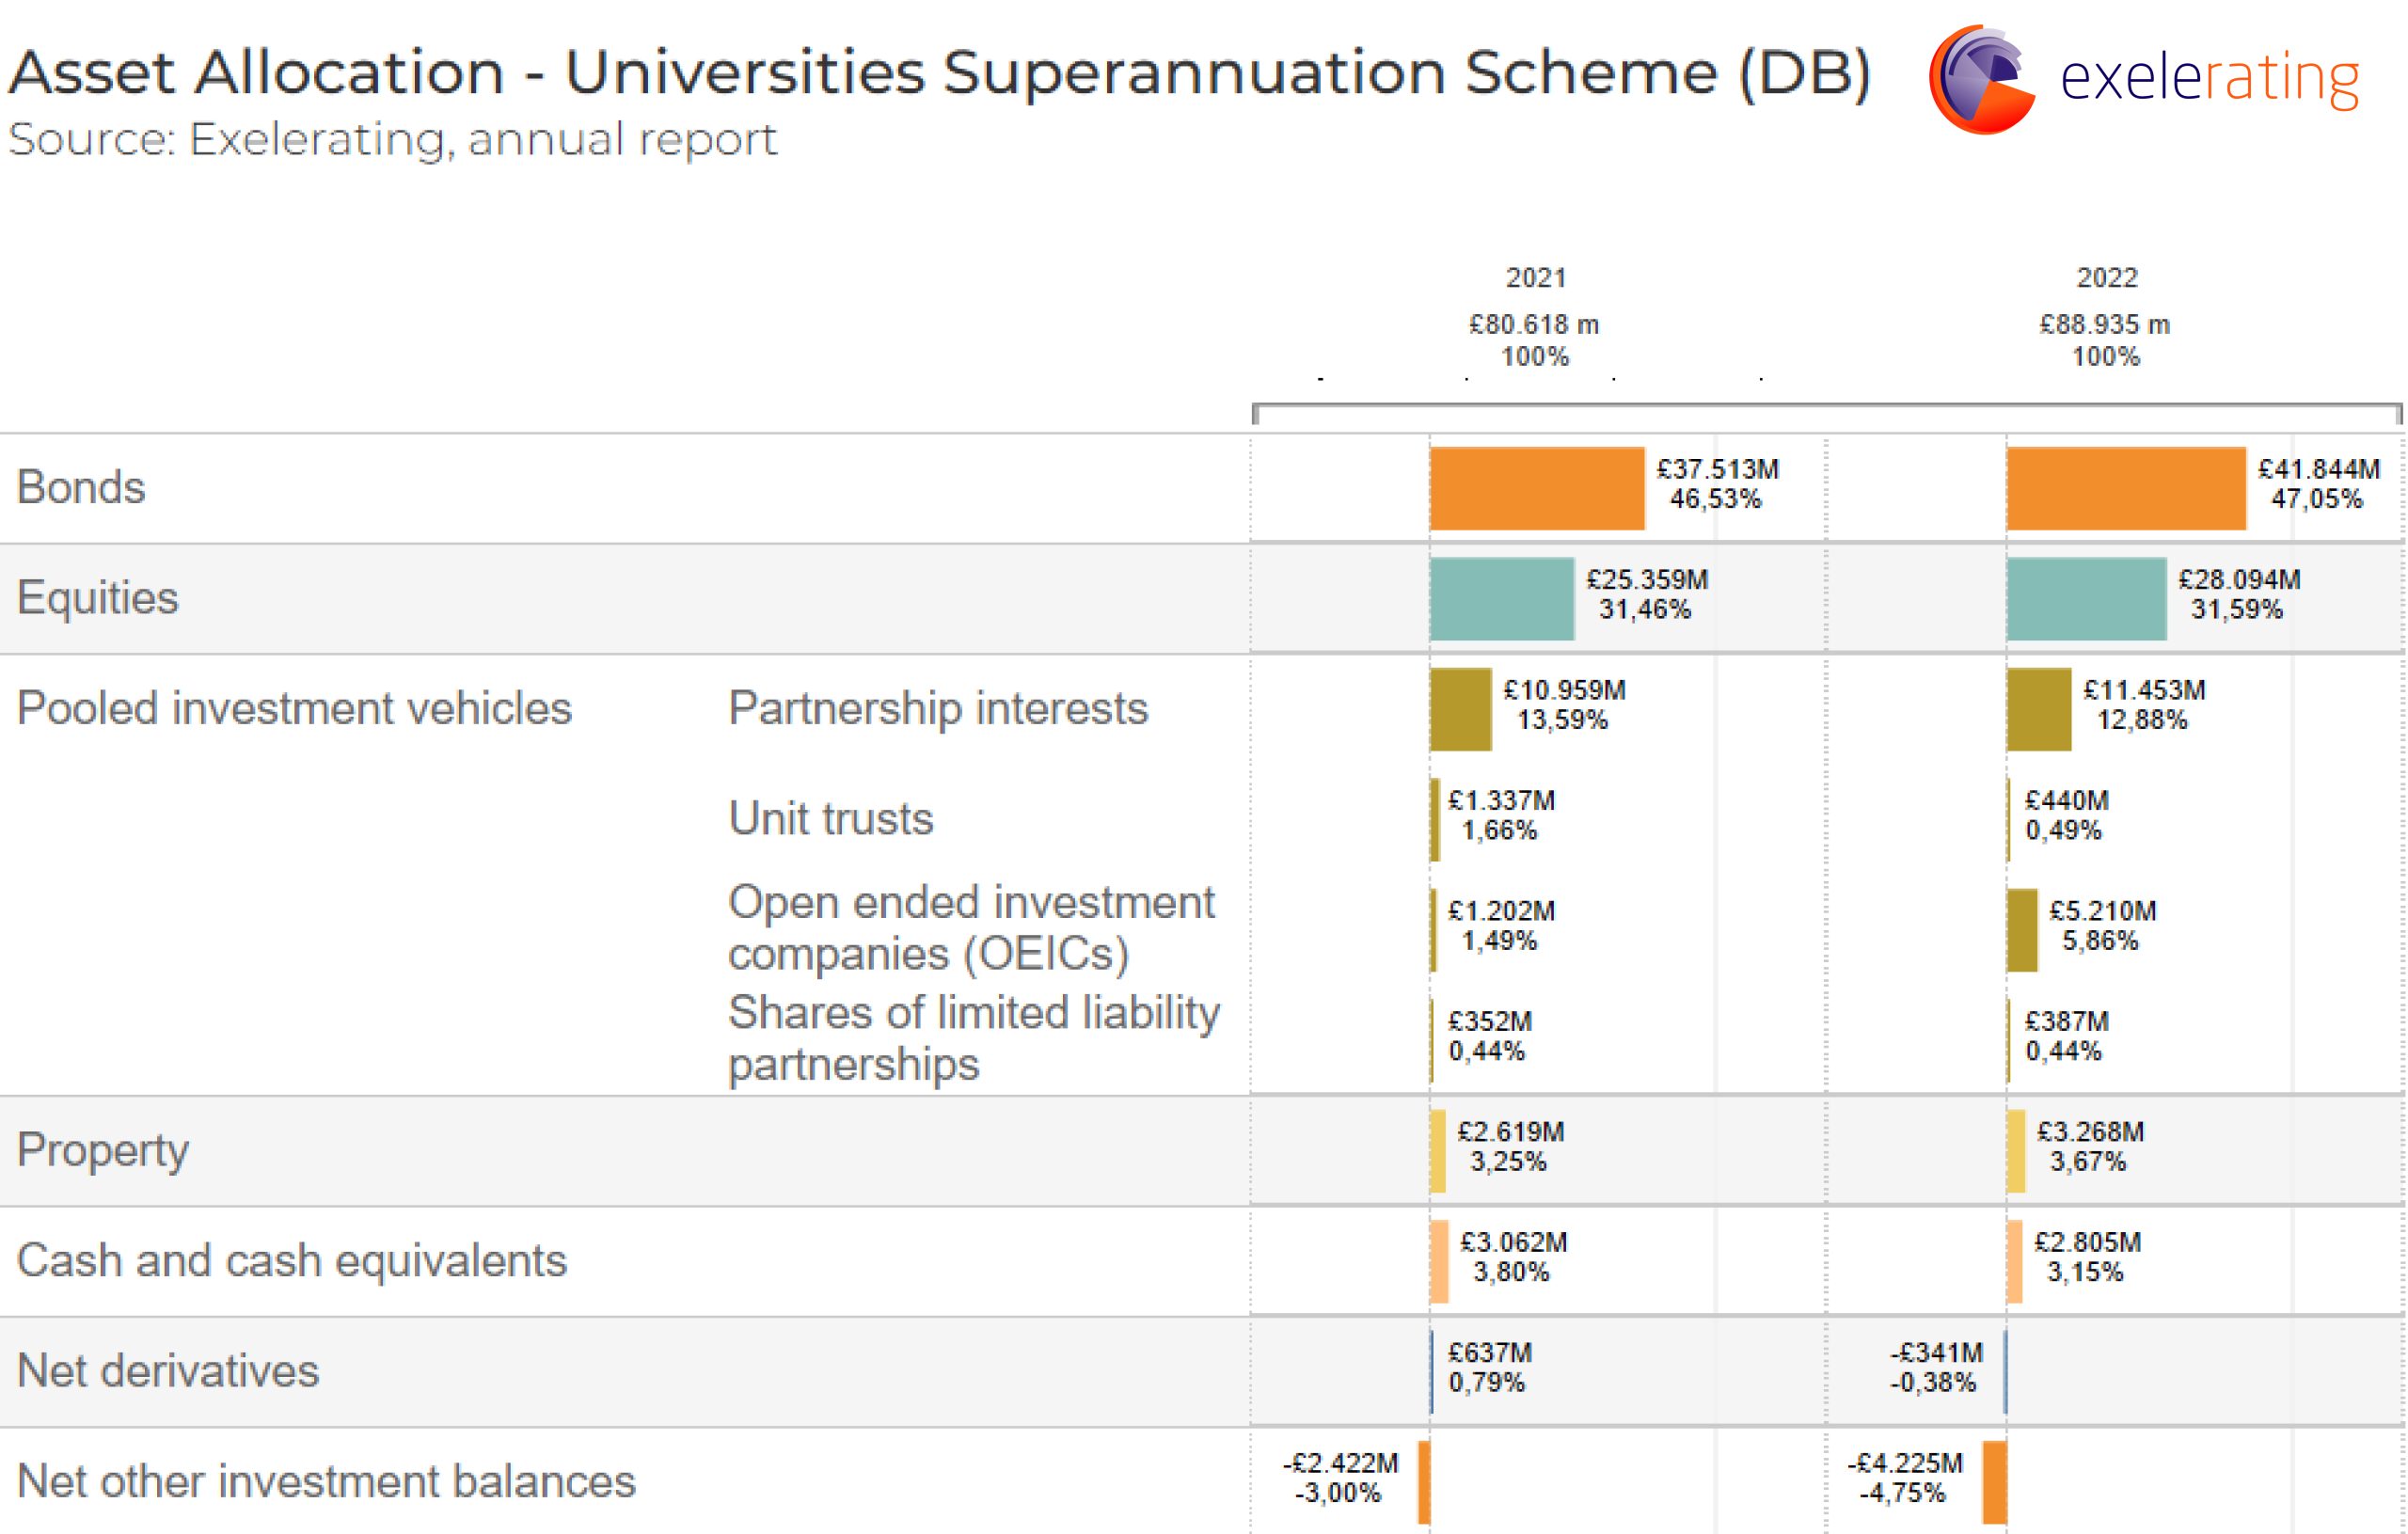 Breakdown of the asset allocation of pension fund University Superannuation Scheme in a horizontal bar chart.